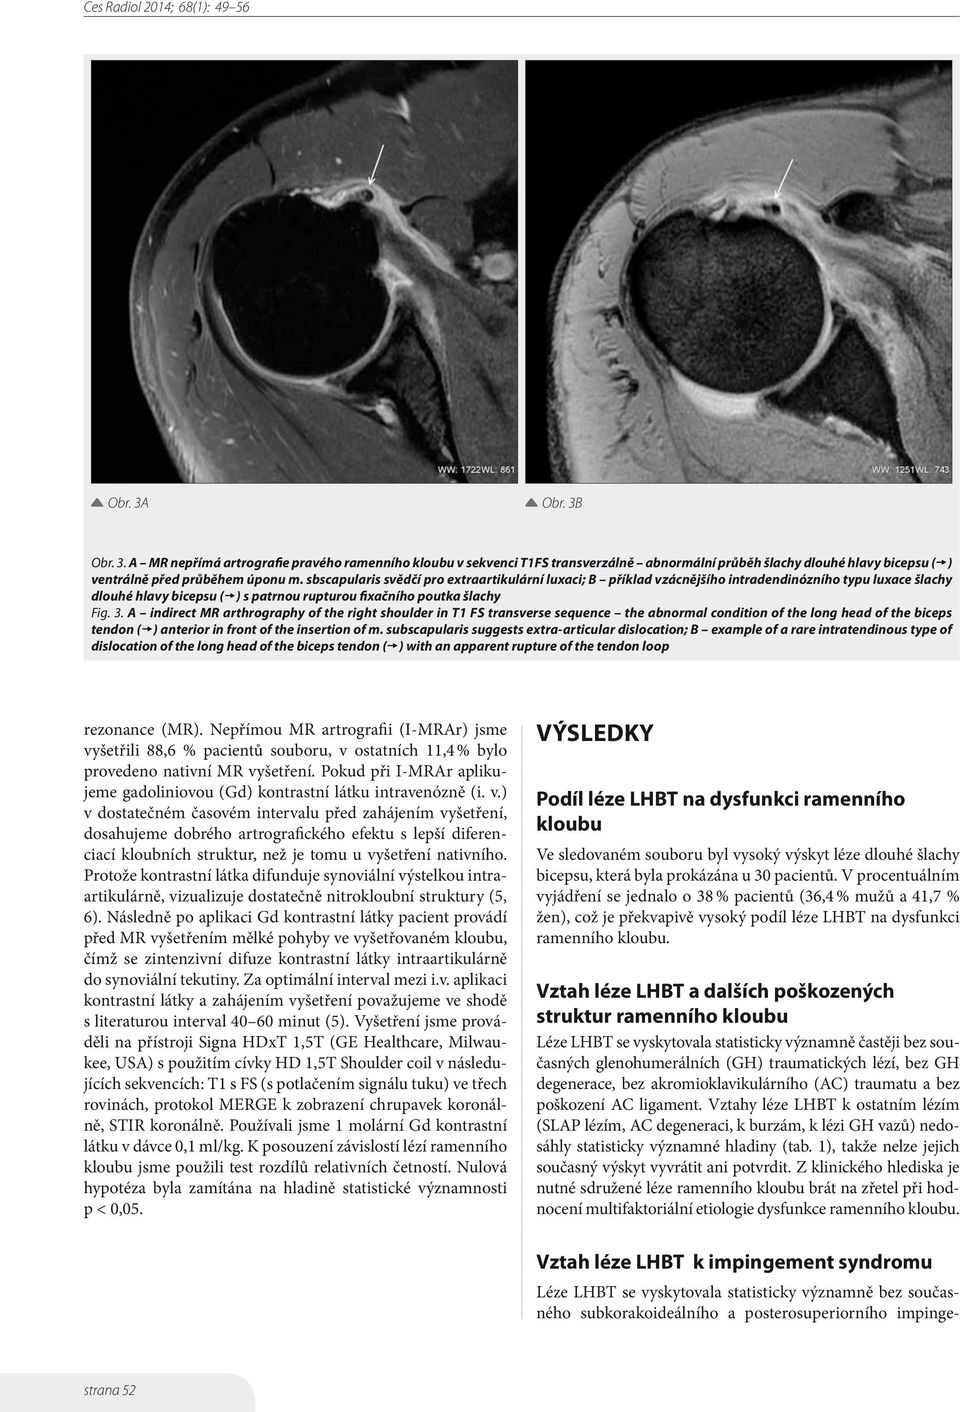 A indirect MR arthrography of the right shoulder in T1 FS transverse sequence the abnormal condition of the long head of the biceps tendon ( ) anterior in front of the insertion of m.